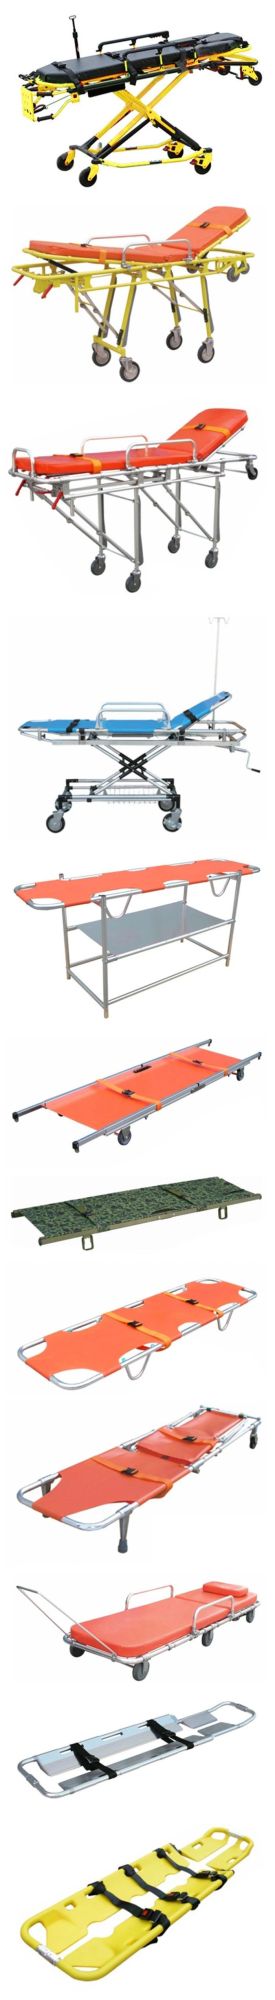 High-Strength Aluminum Alloy Stair Stretcher with Handles